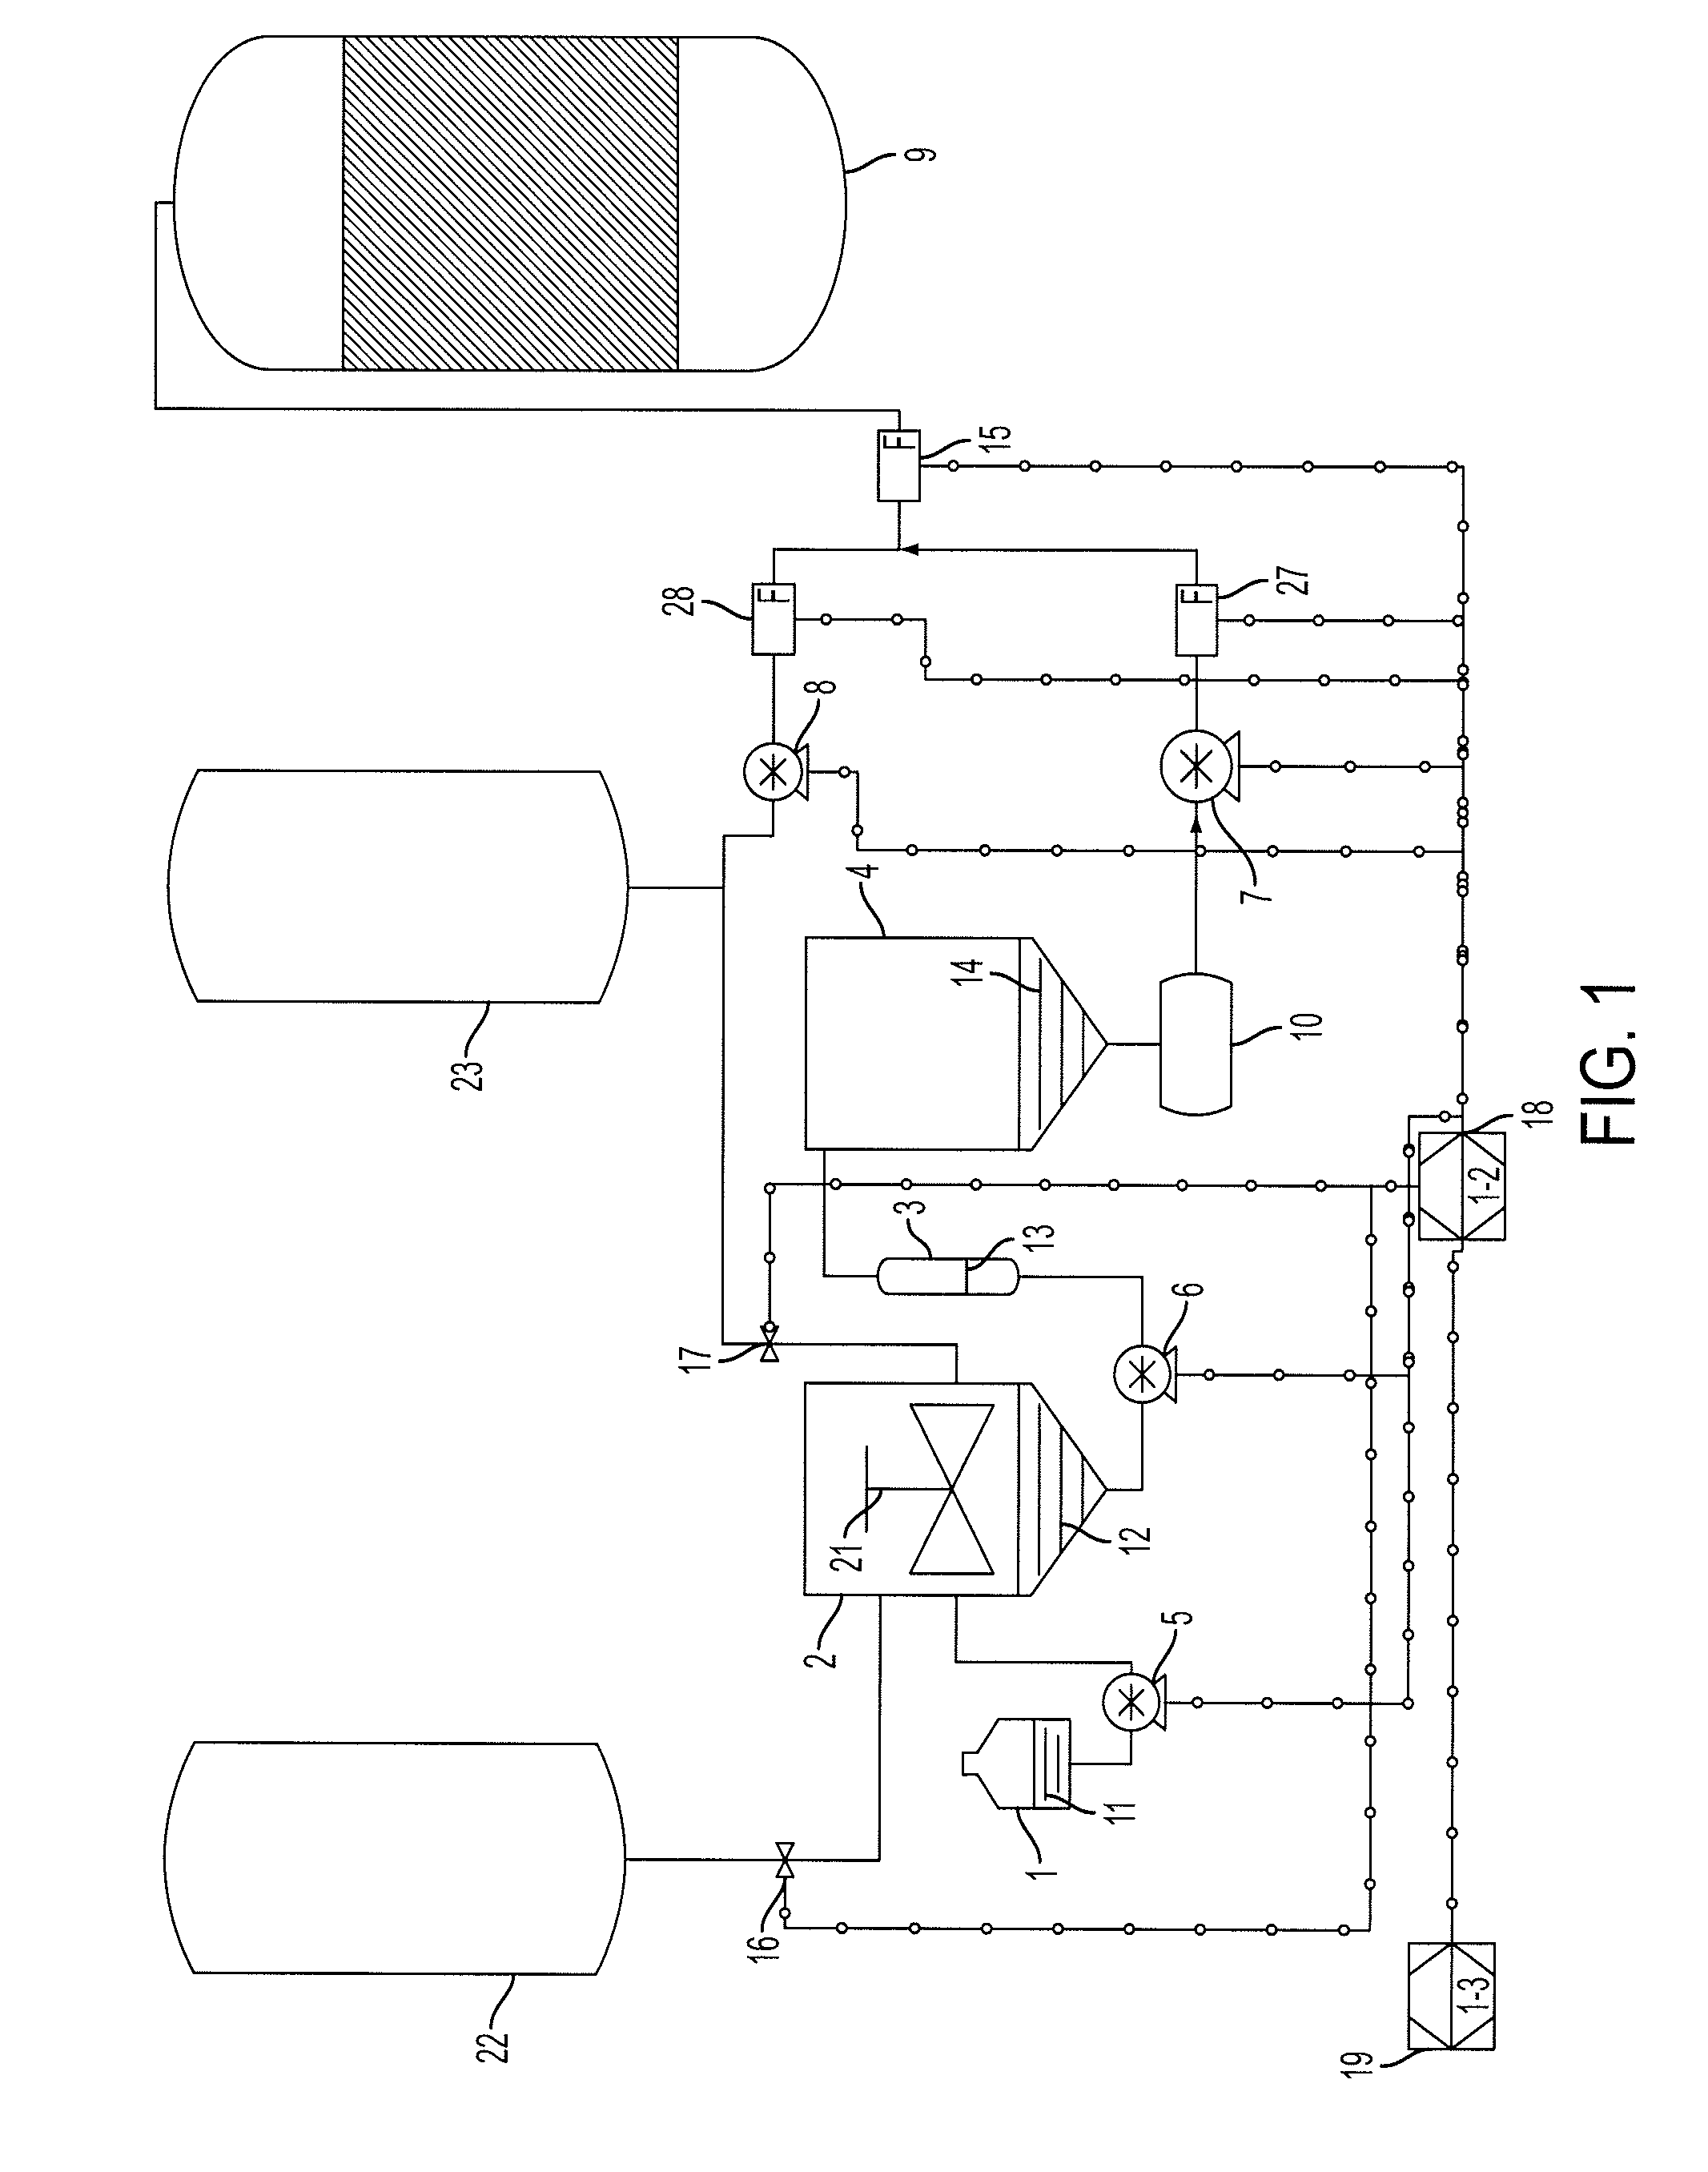 Method and apparatus for producing alcohol or sugar using a commercial-scale bioreactor